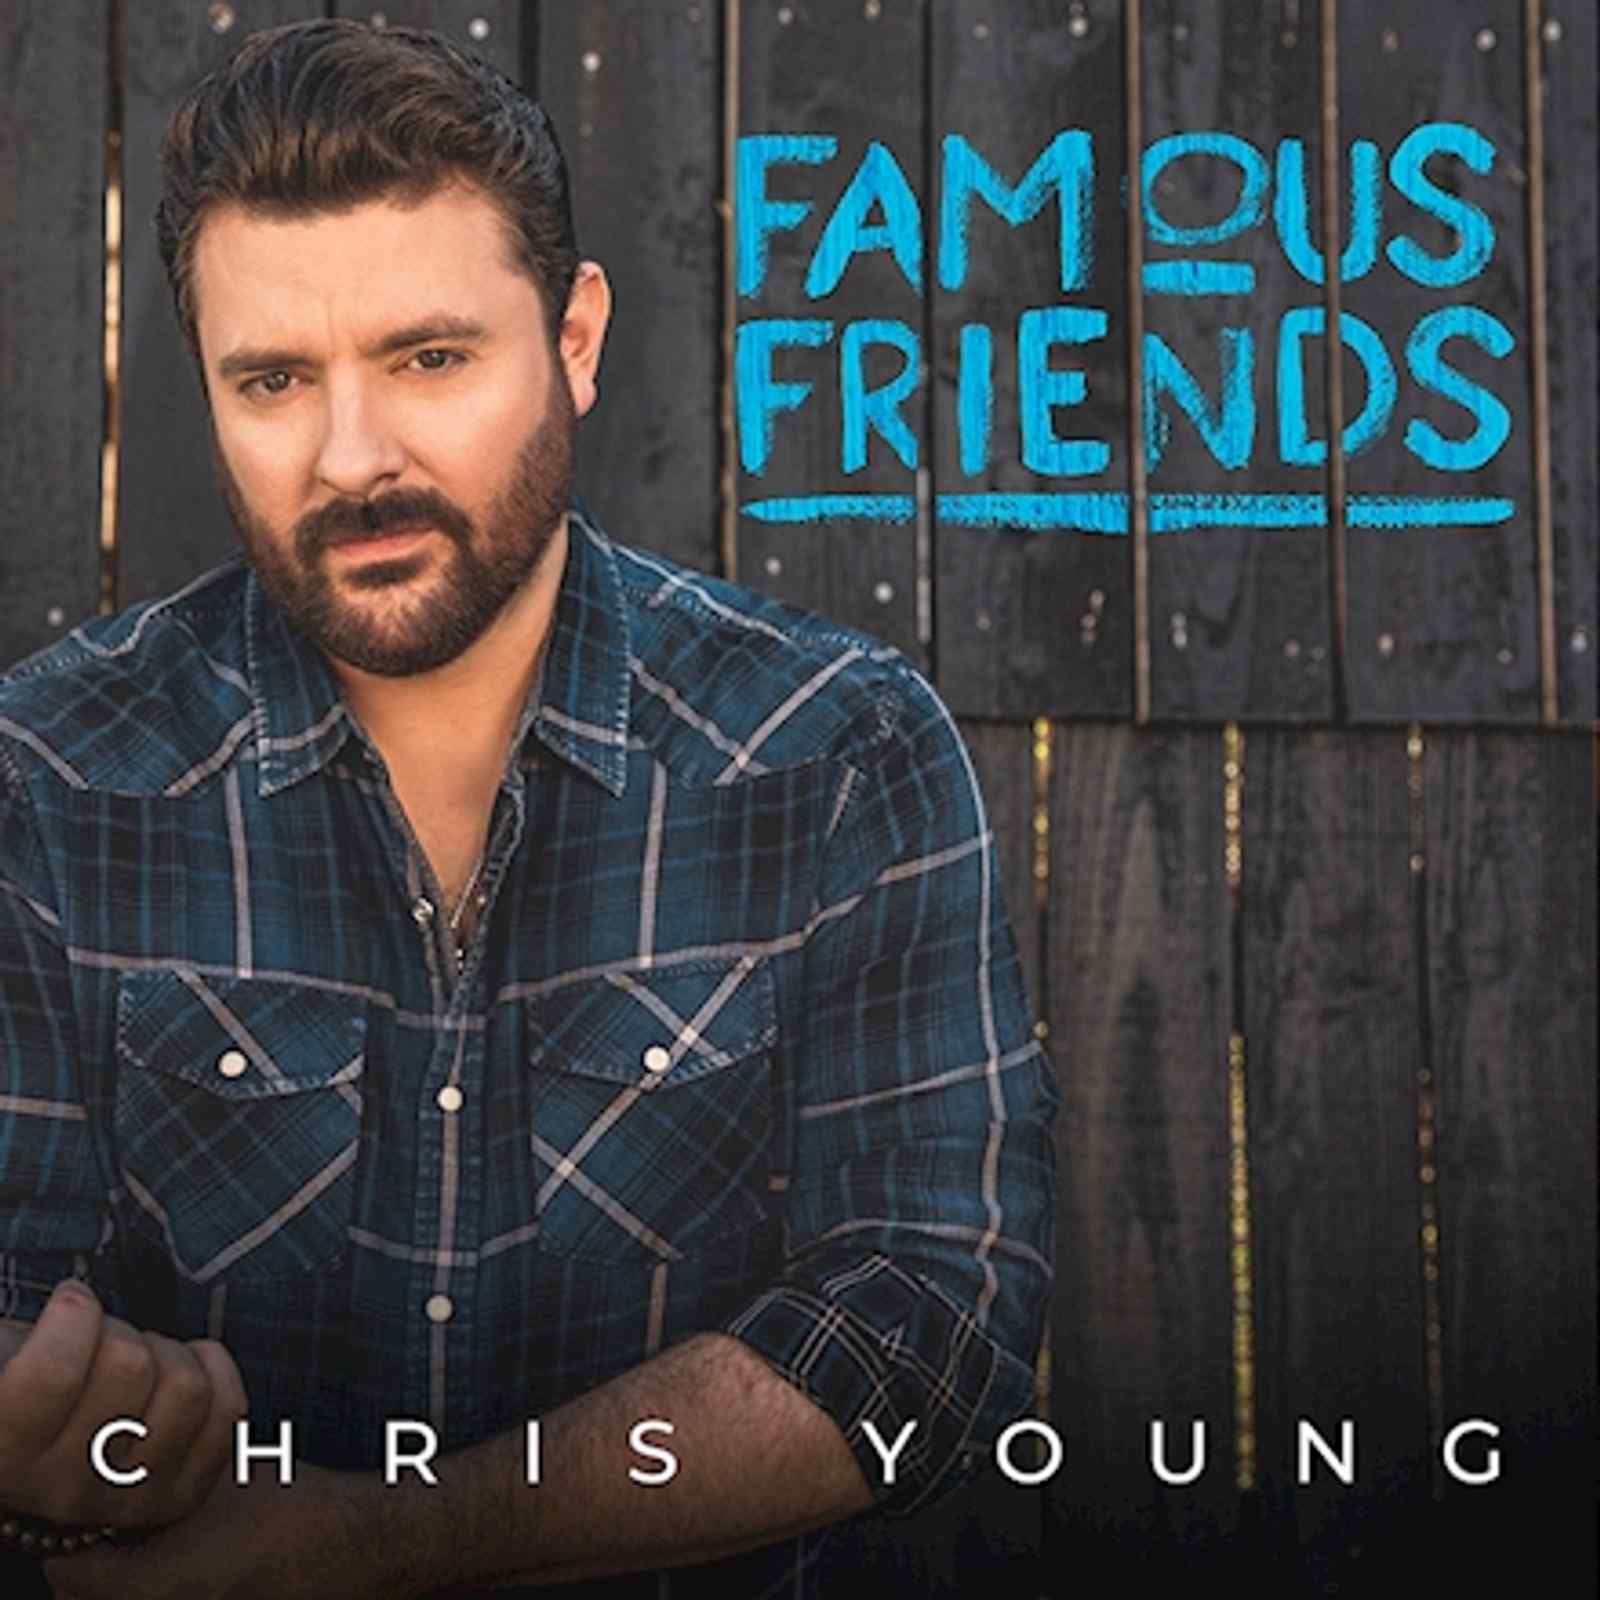 Famous Friends by Chris Young